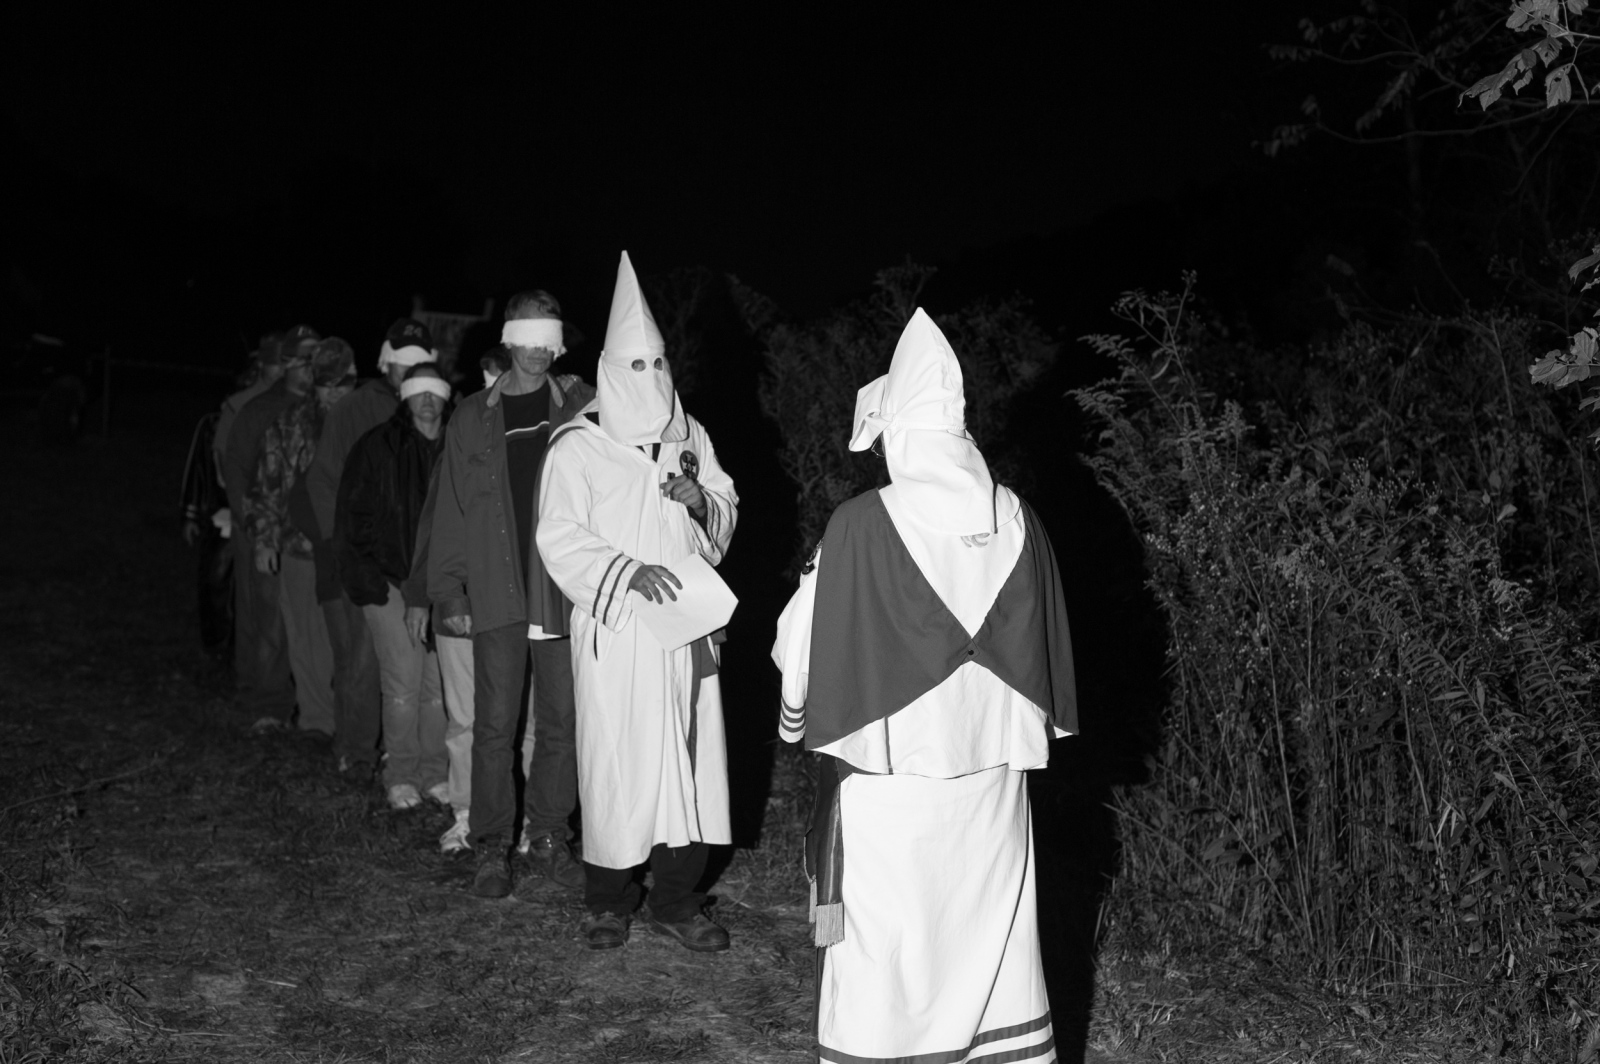 Ku Klux Klan - Tennessee. Probates wishing to become citizens of...